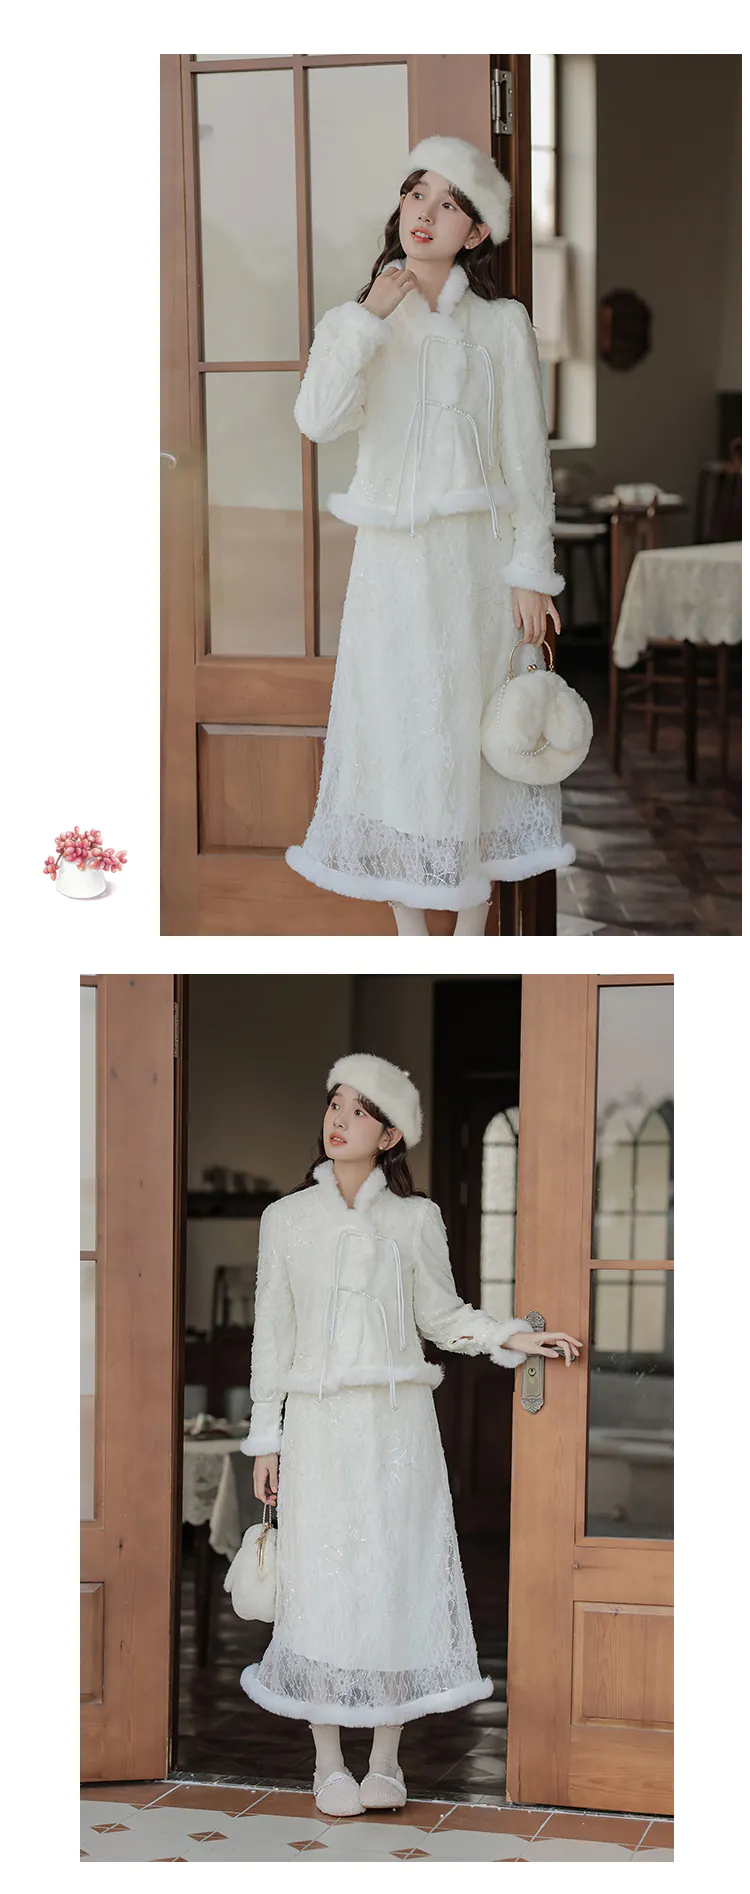 Elegant-Ladies-White-Vintage-Lace-Warm-Top-with-Skirt-Casual-Outfit14